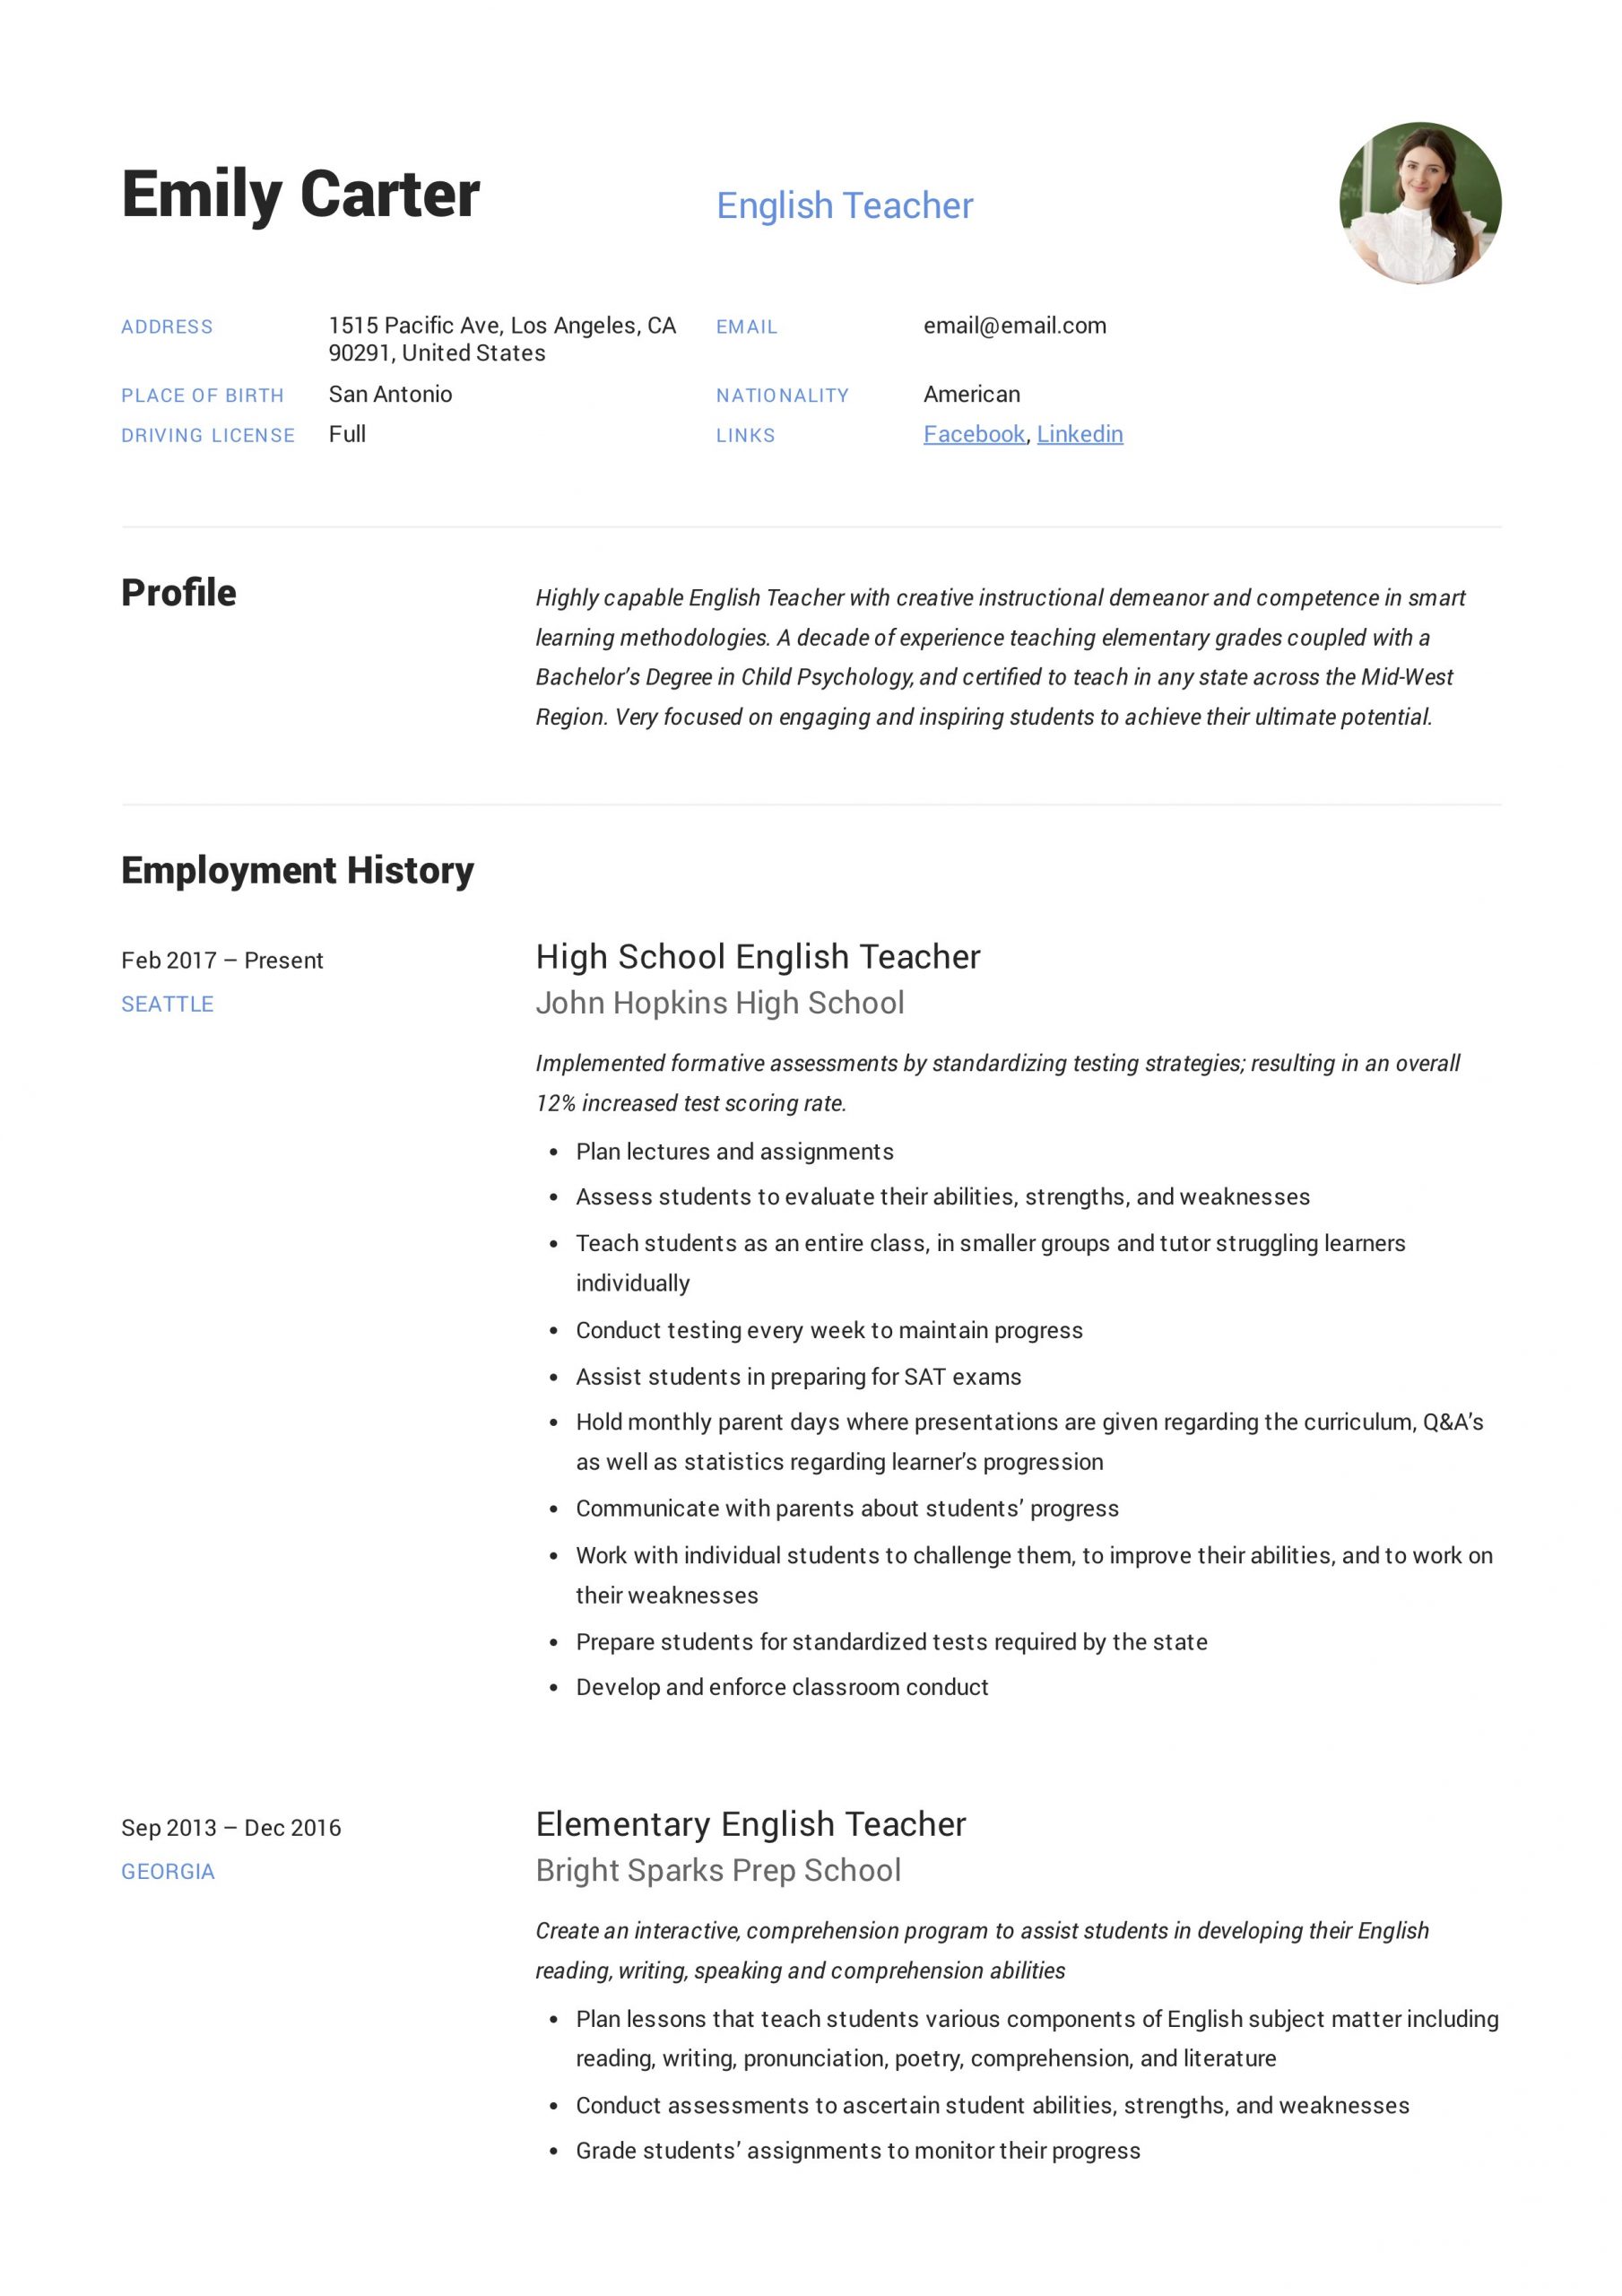 Sample Resume for College Principal In India English Teacher Resume & Writing Guide  12 Free Templates 2020